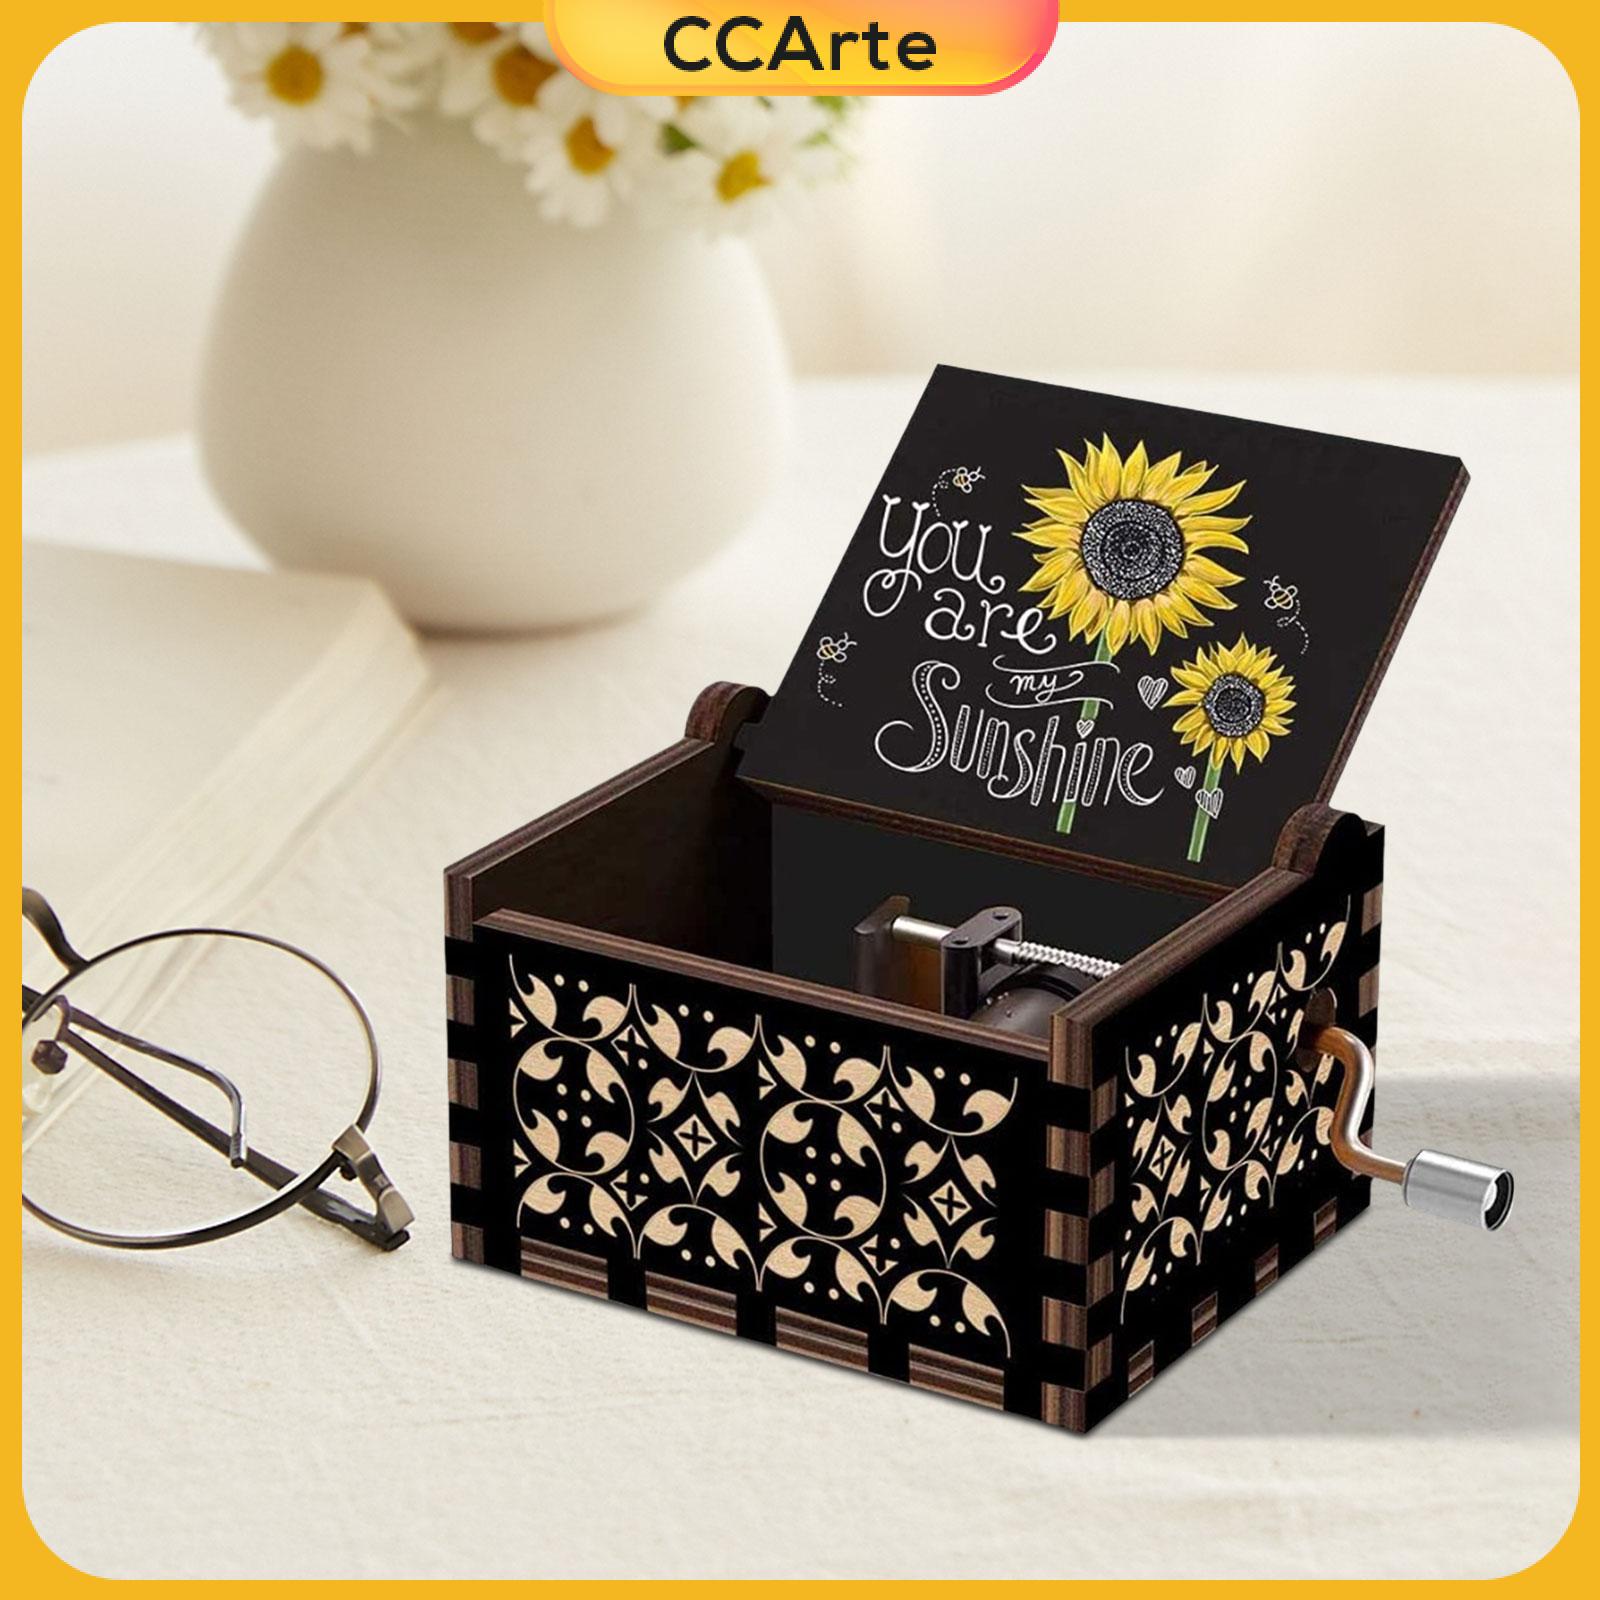 CCArte You Are My Sunshainemusic Boxes Love Gift Wooden Sunshine Musical